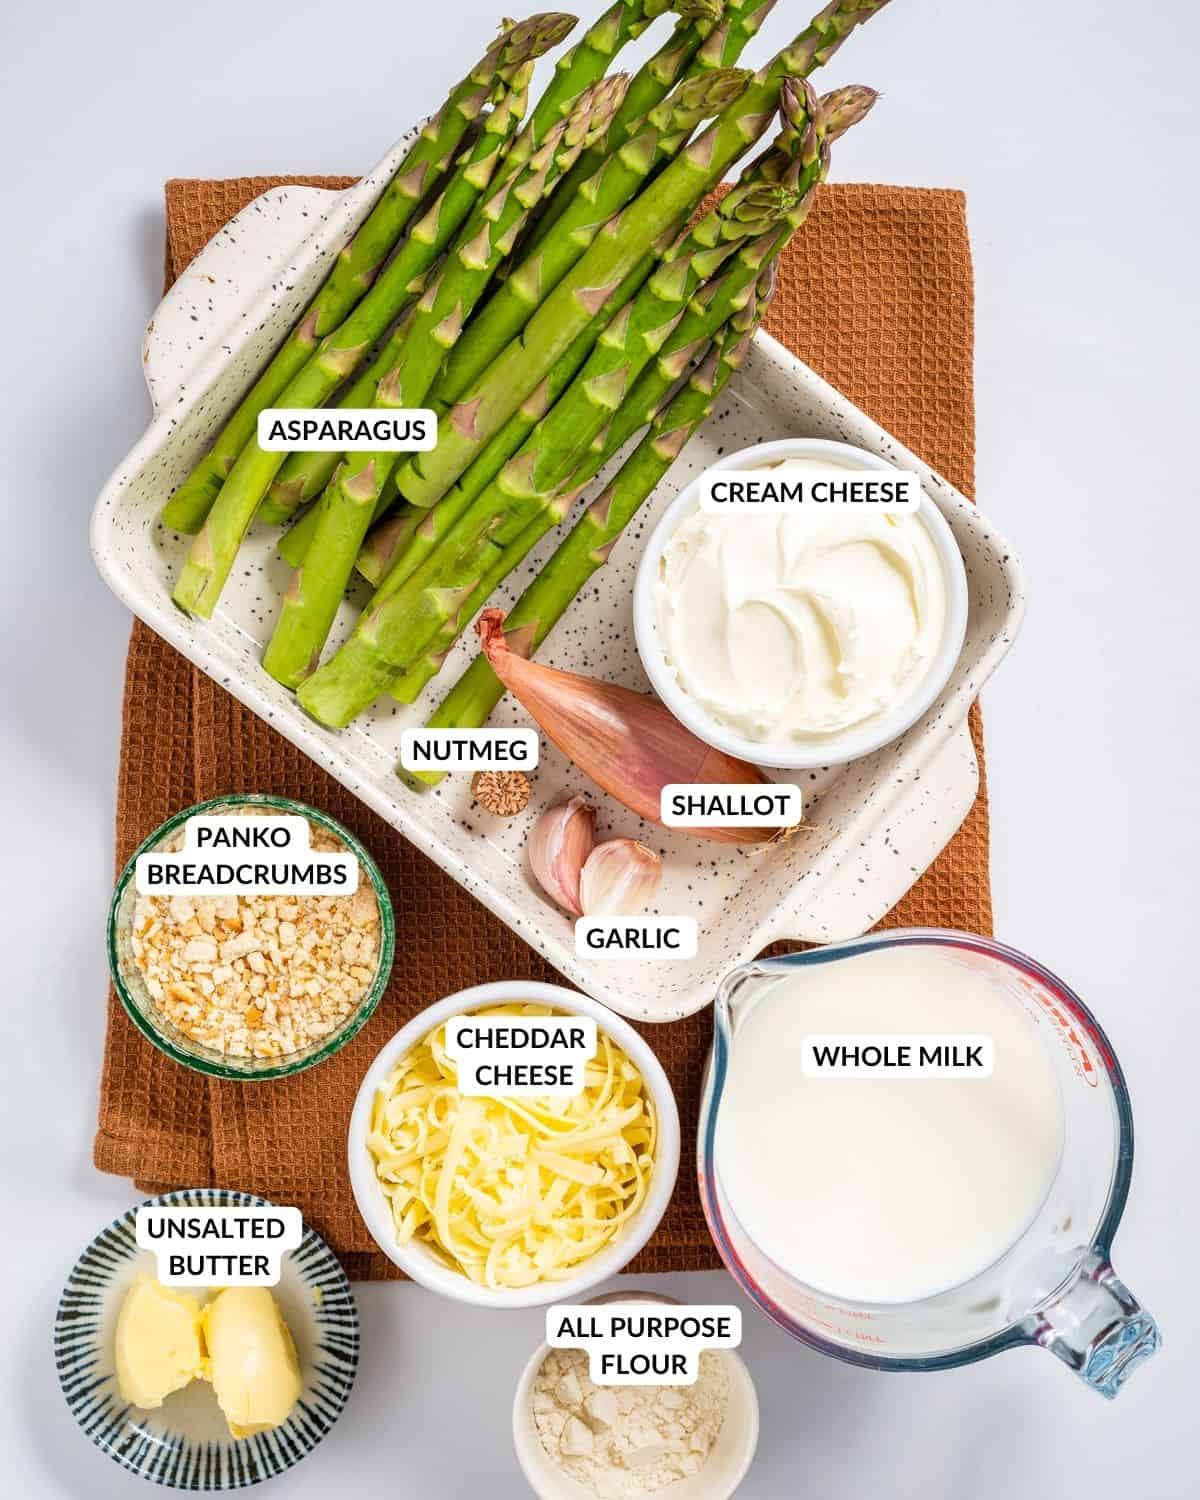 Labeled ingredient list for asparagus casserole - check recipe card for details!